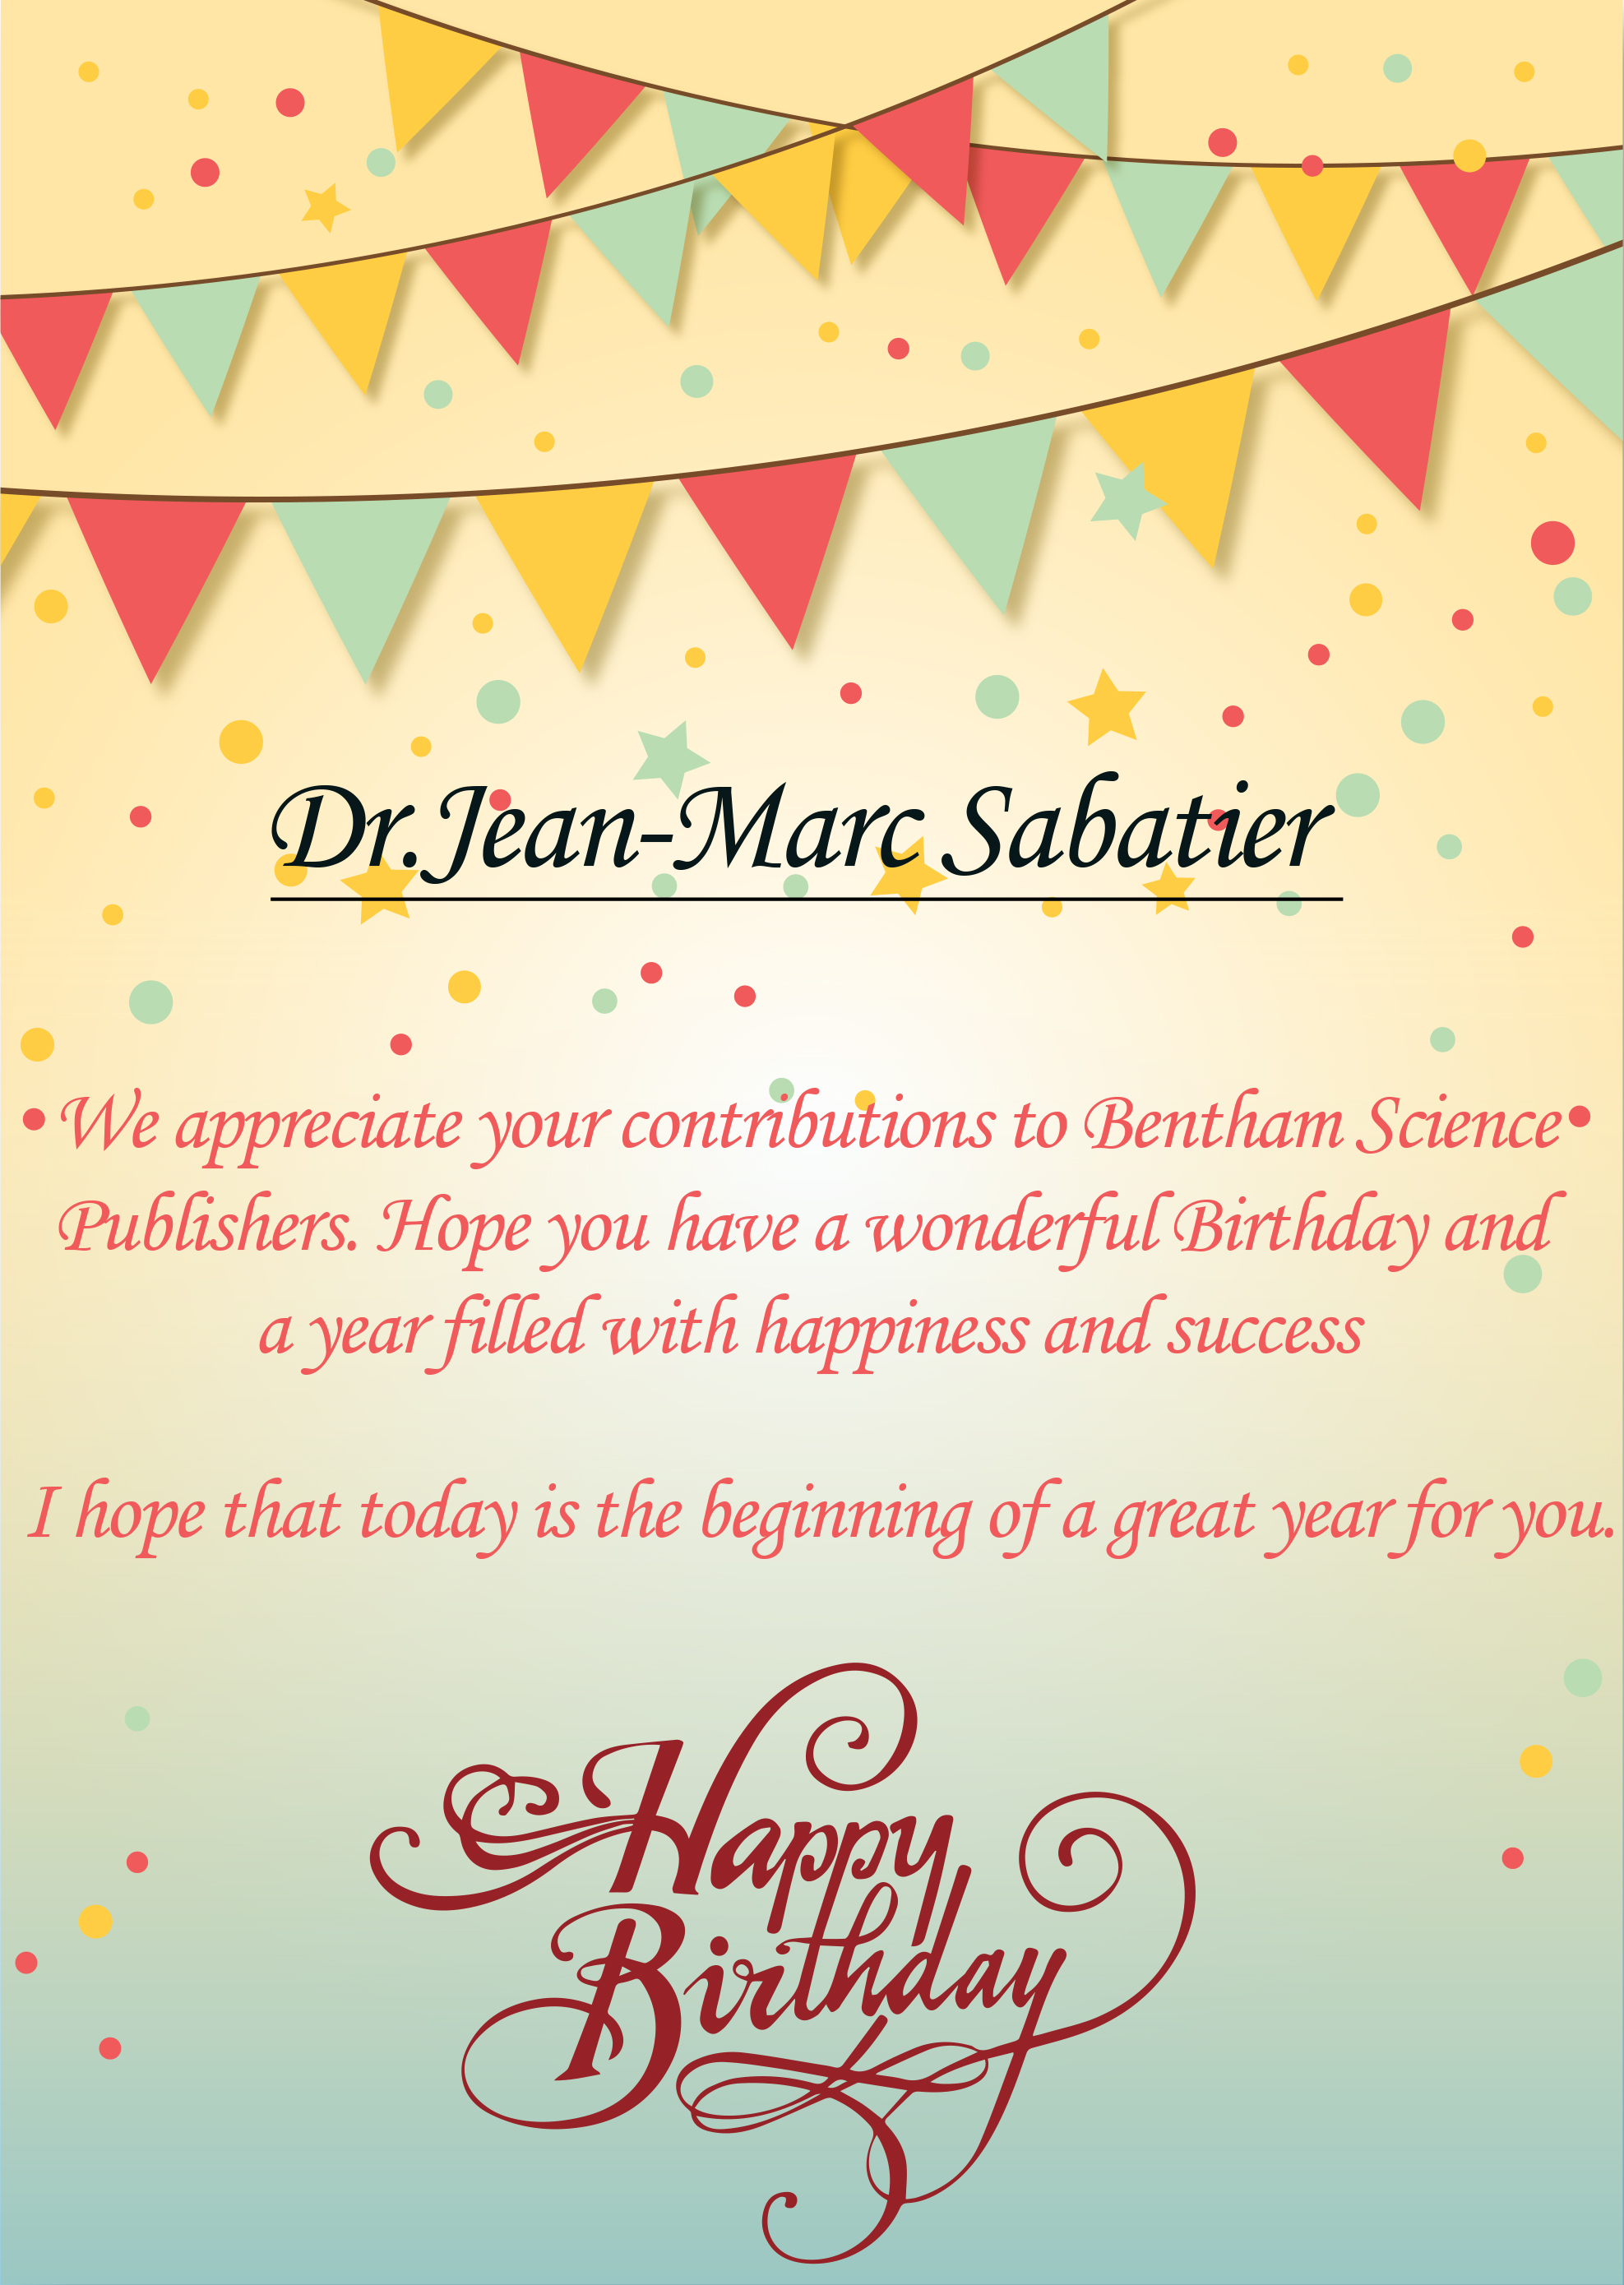 Wishing A Very Happy Birthday To Dr. Jean-Marc Sabatier à Fete Jean Marc